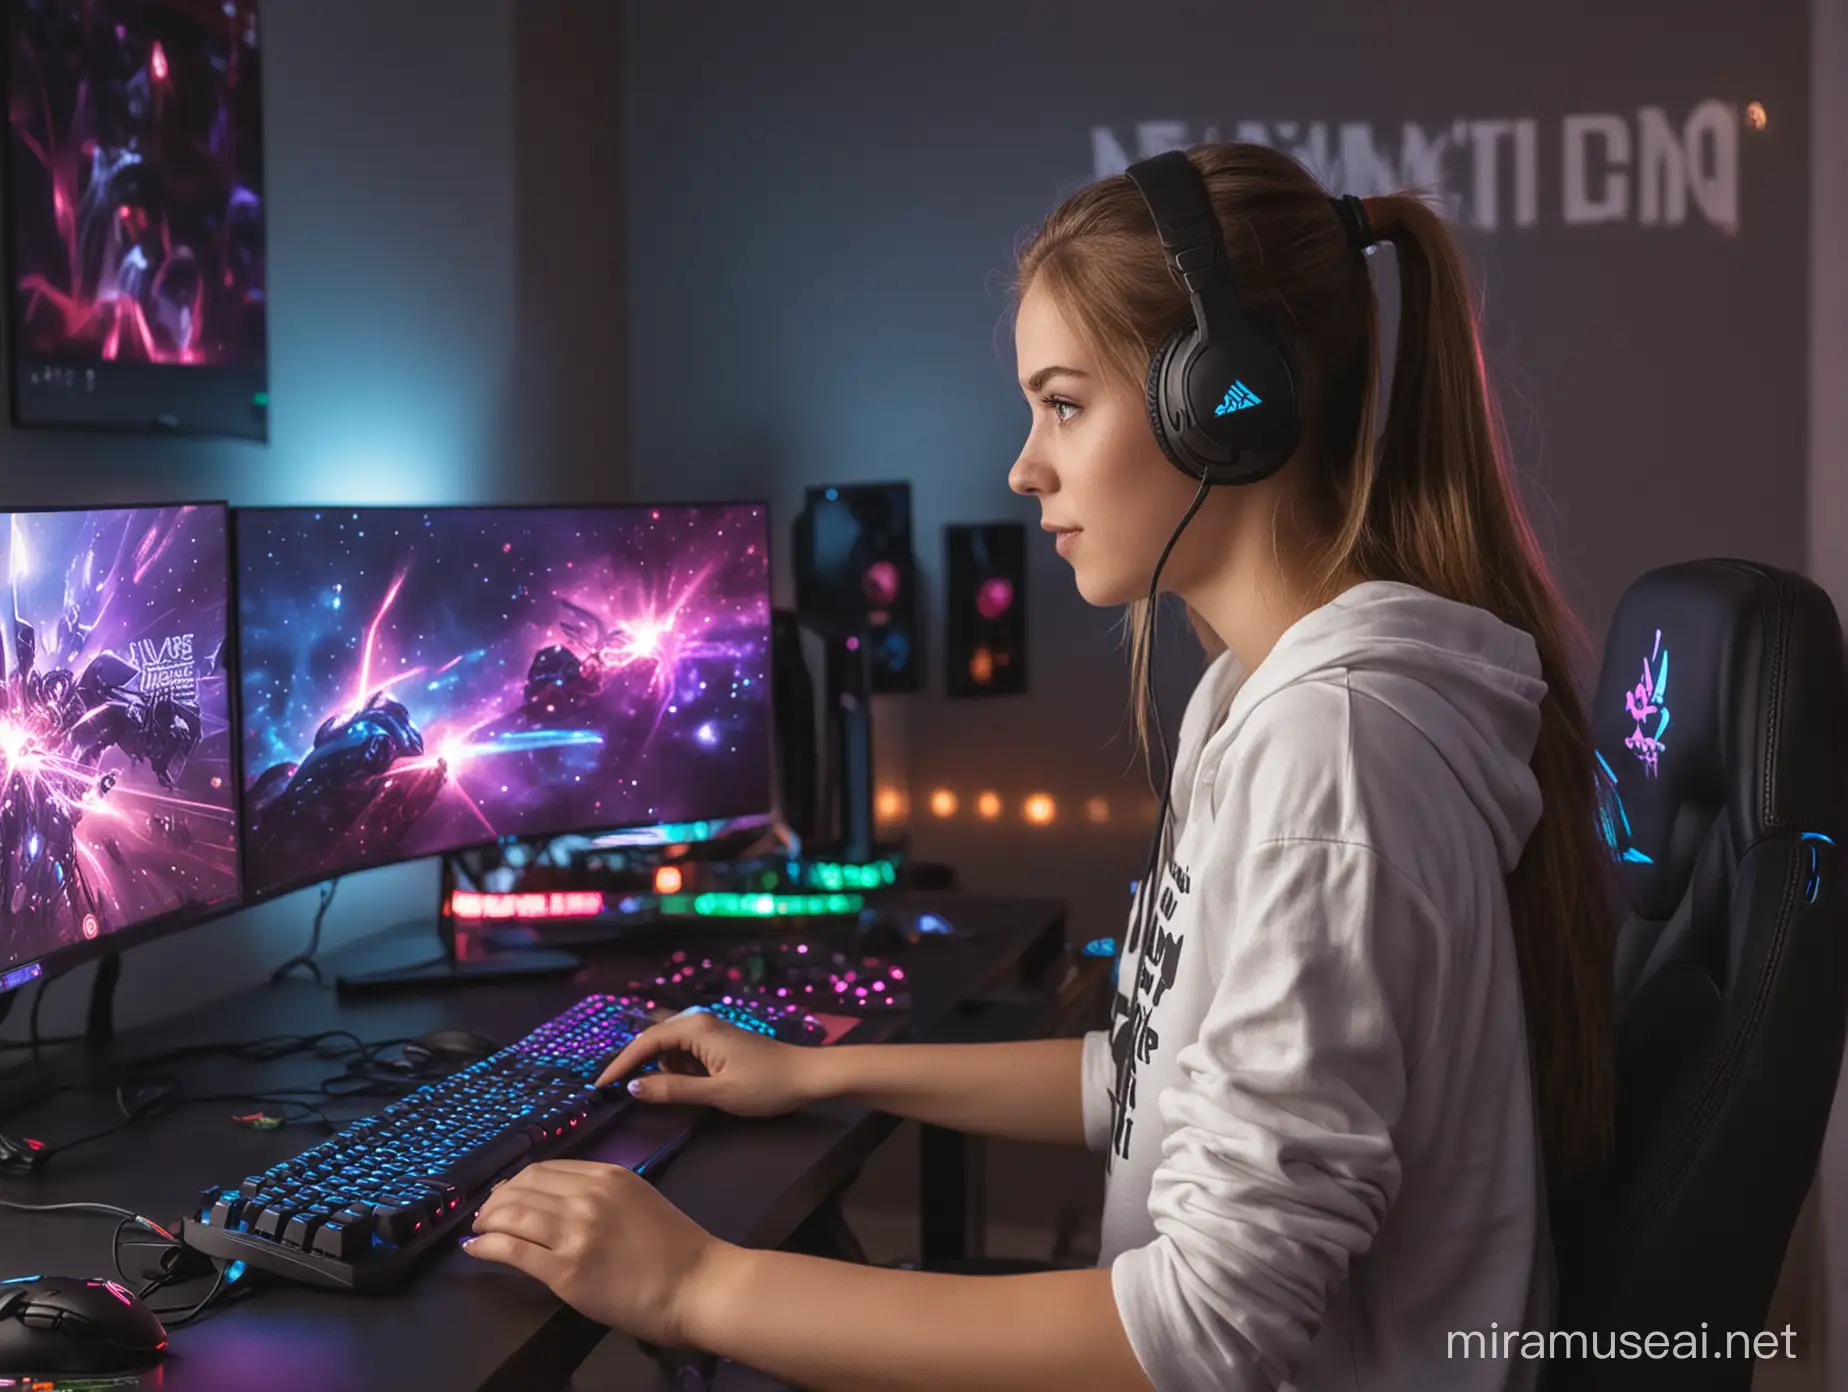 Girl Gaming at Personal Computer in Vibrant Gaming Room